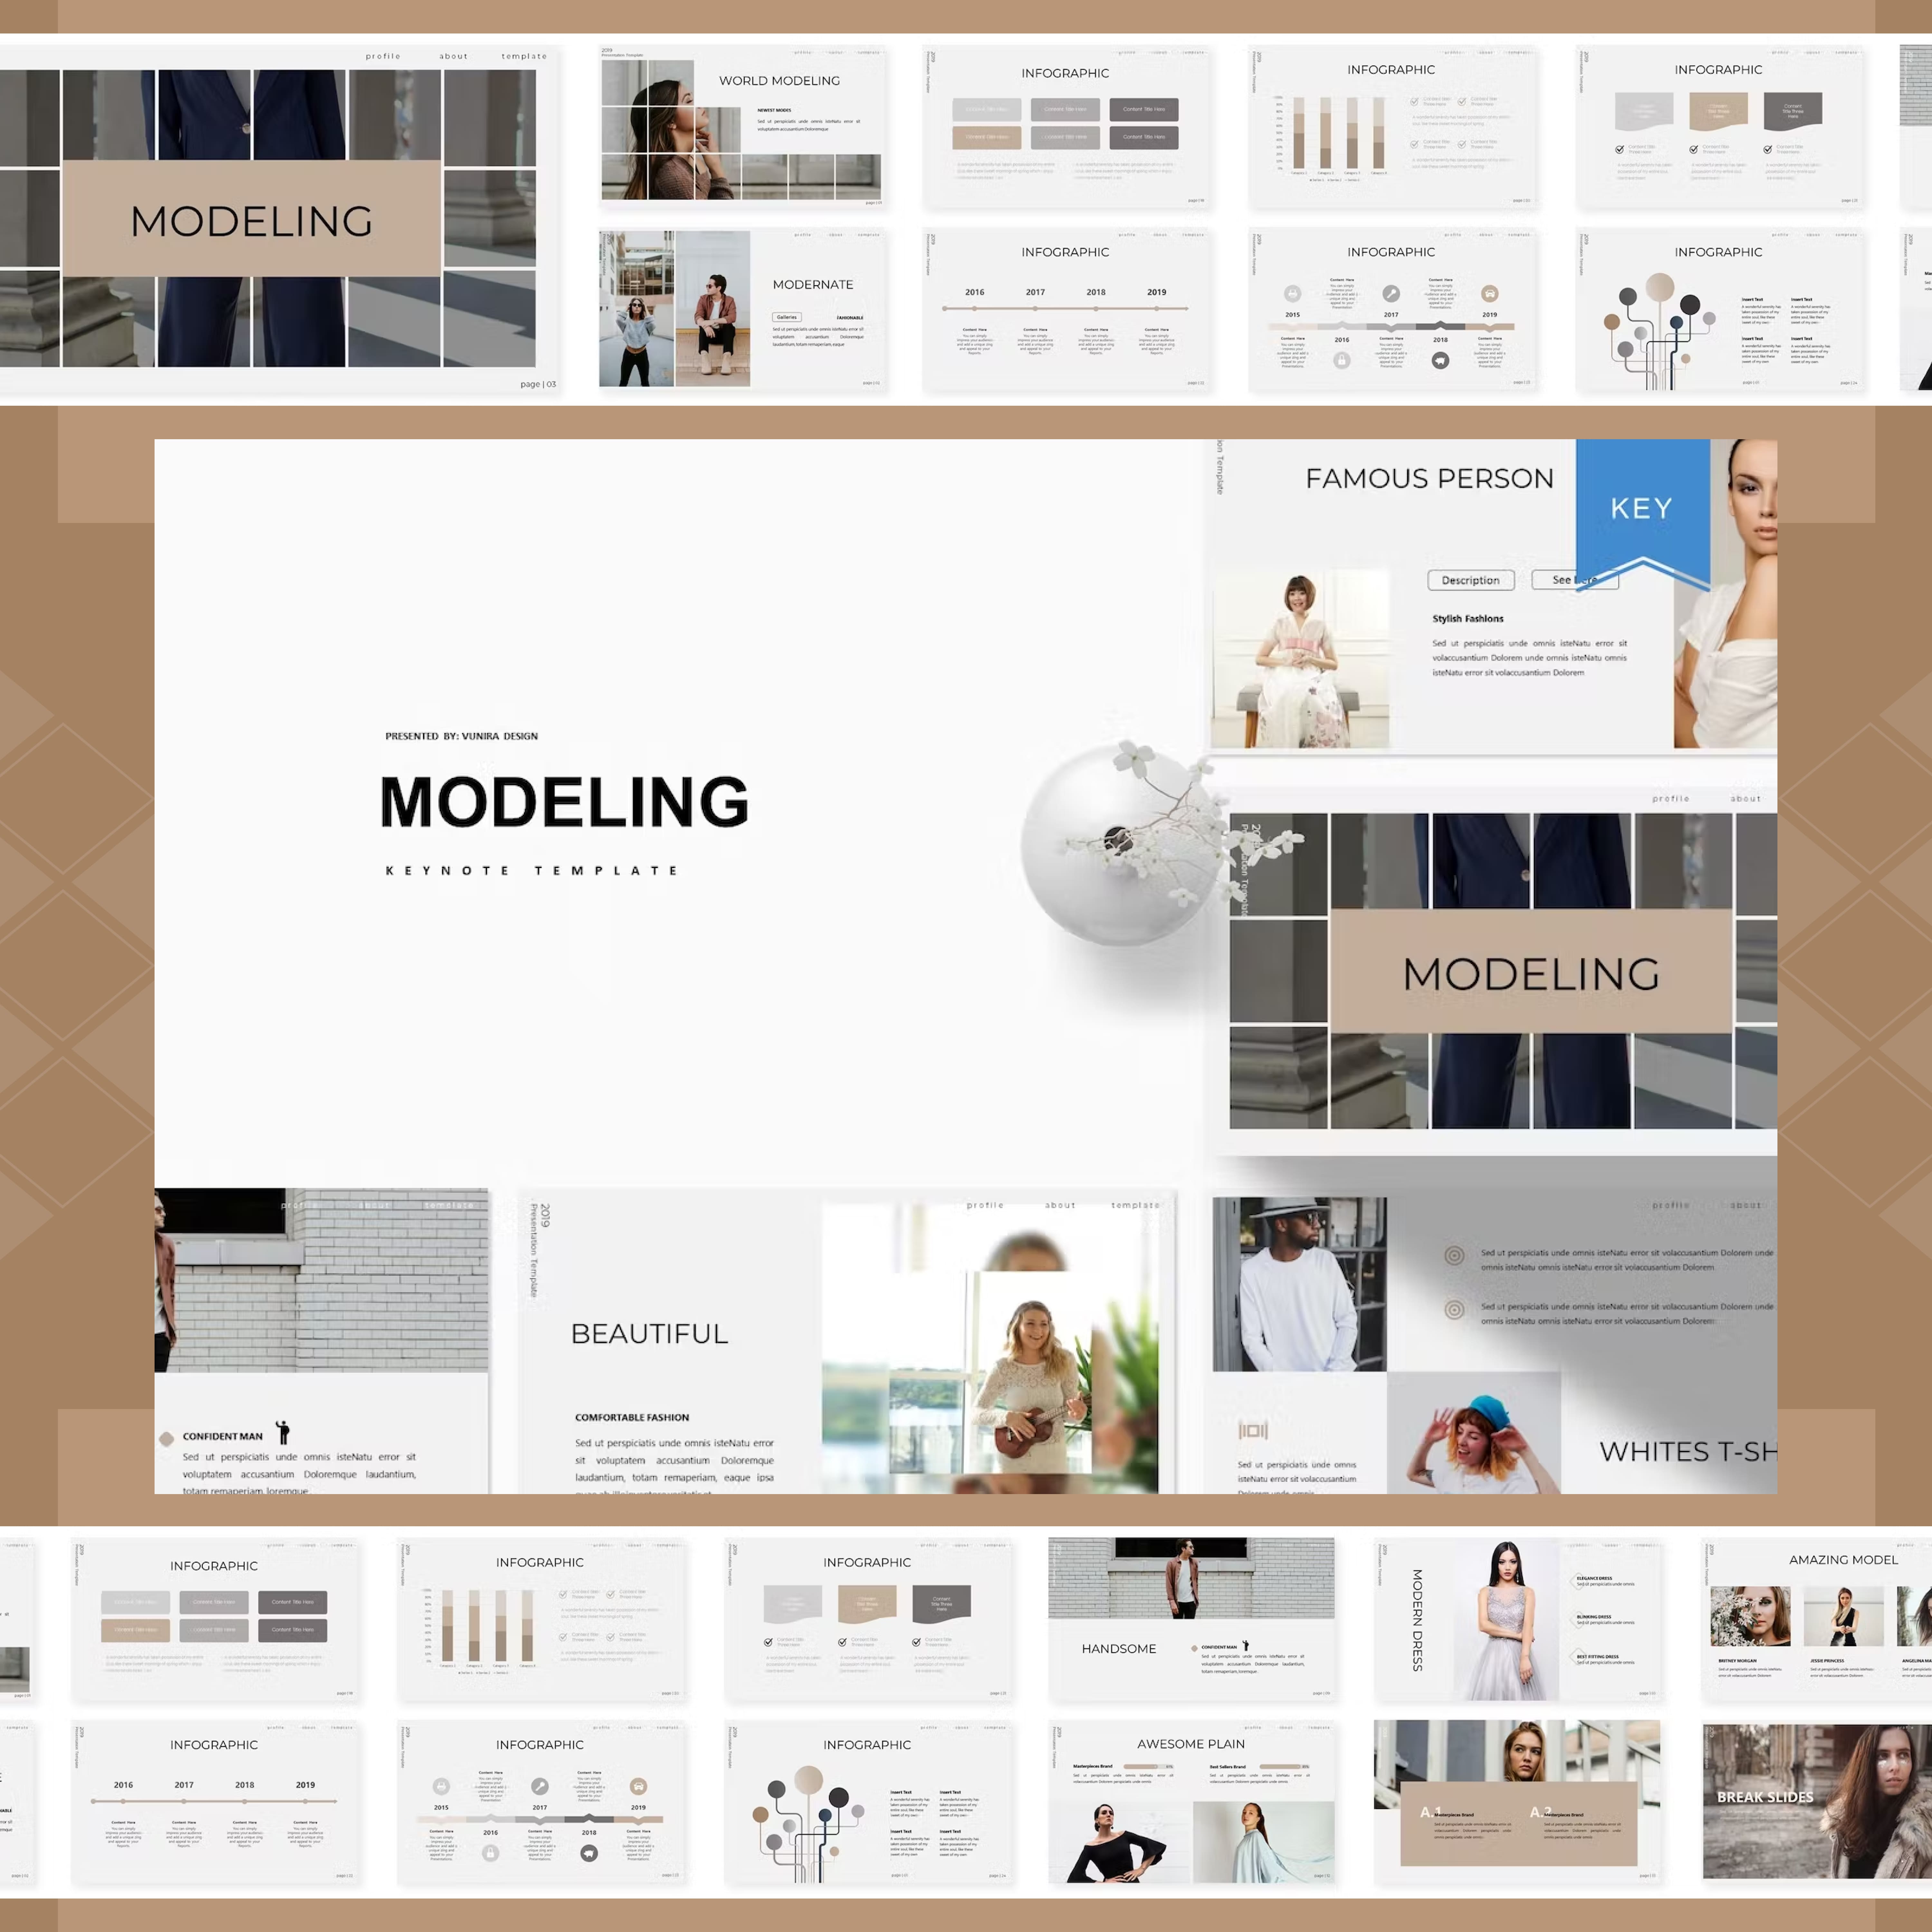 Modeling | Keynote Template Cover.